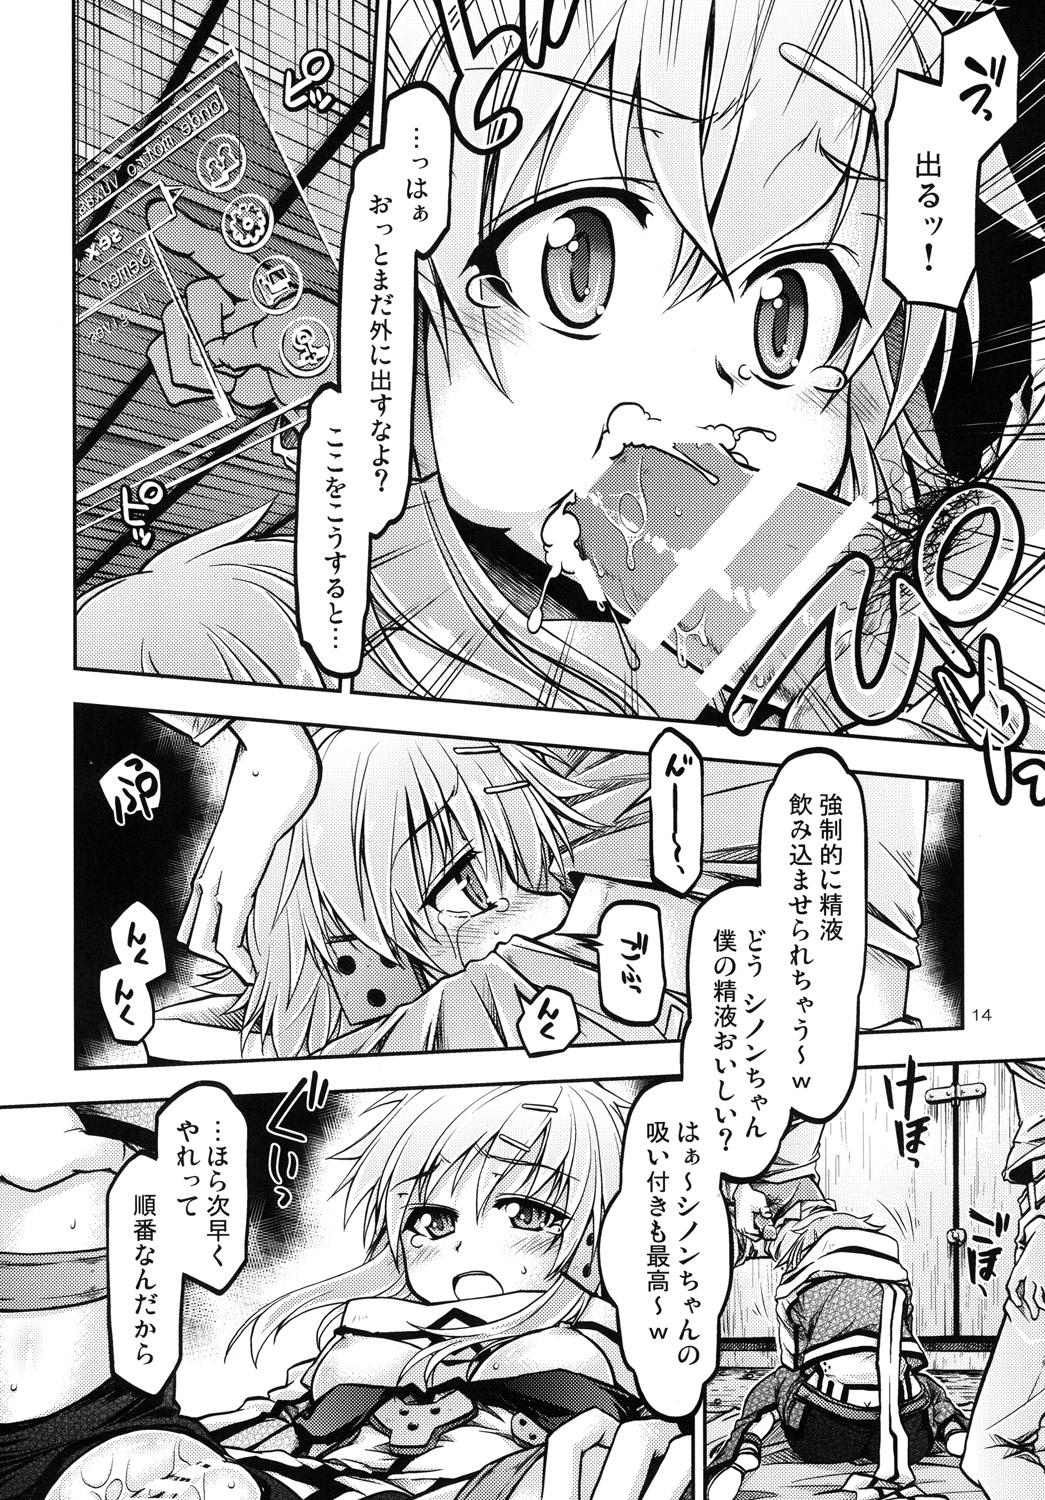 Rimming Gspot - Sword art online Leche - Page 13